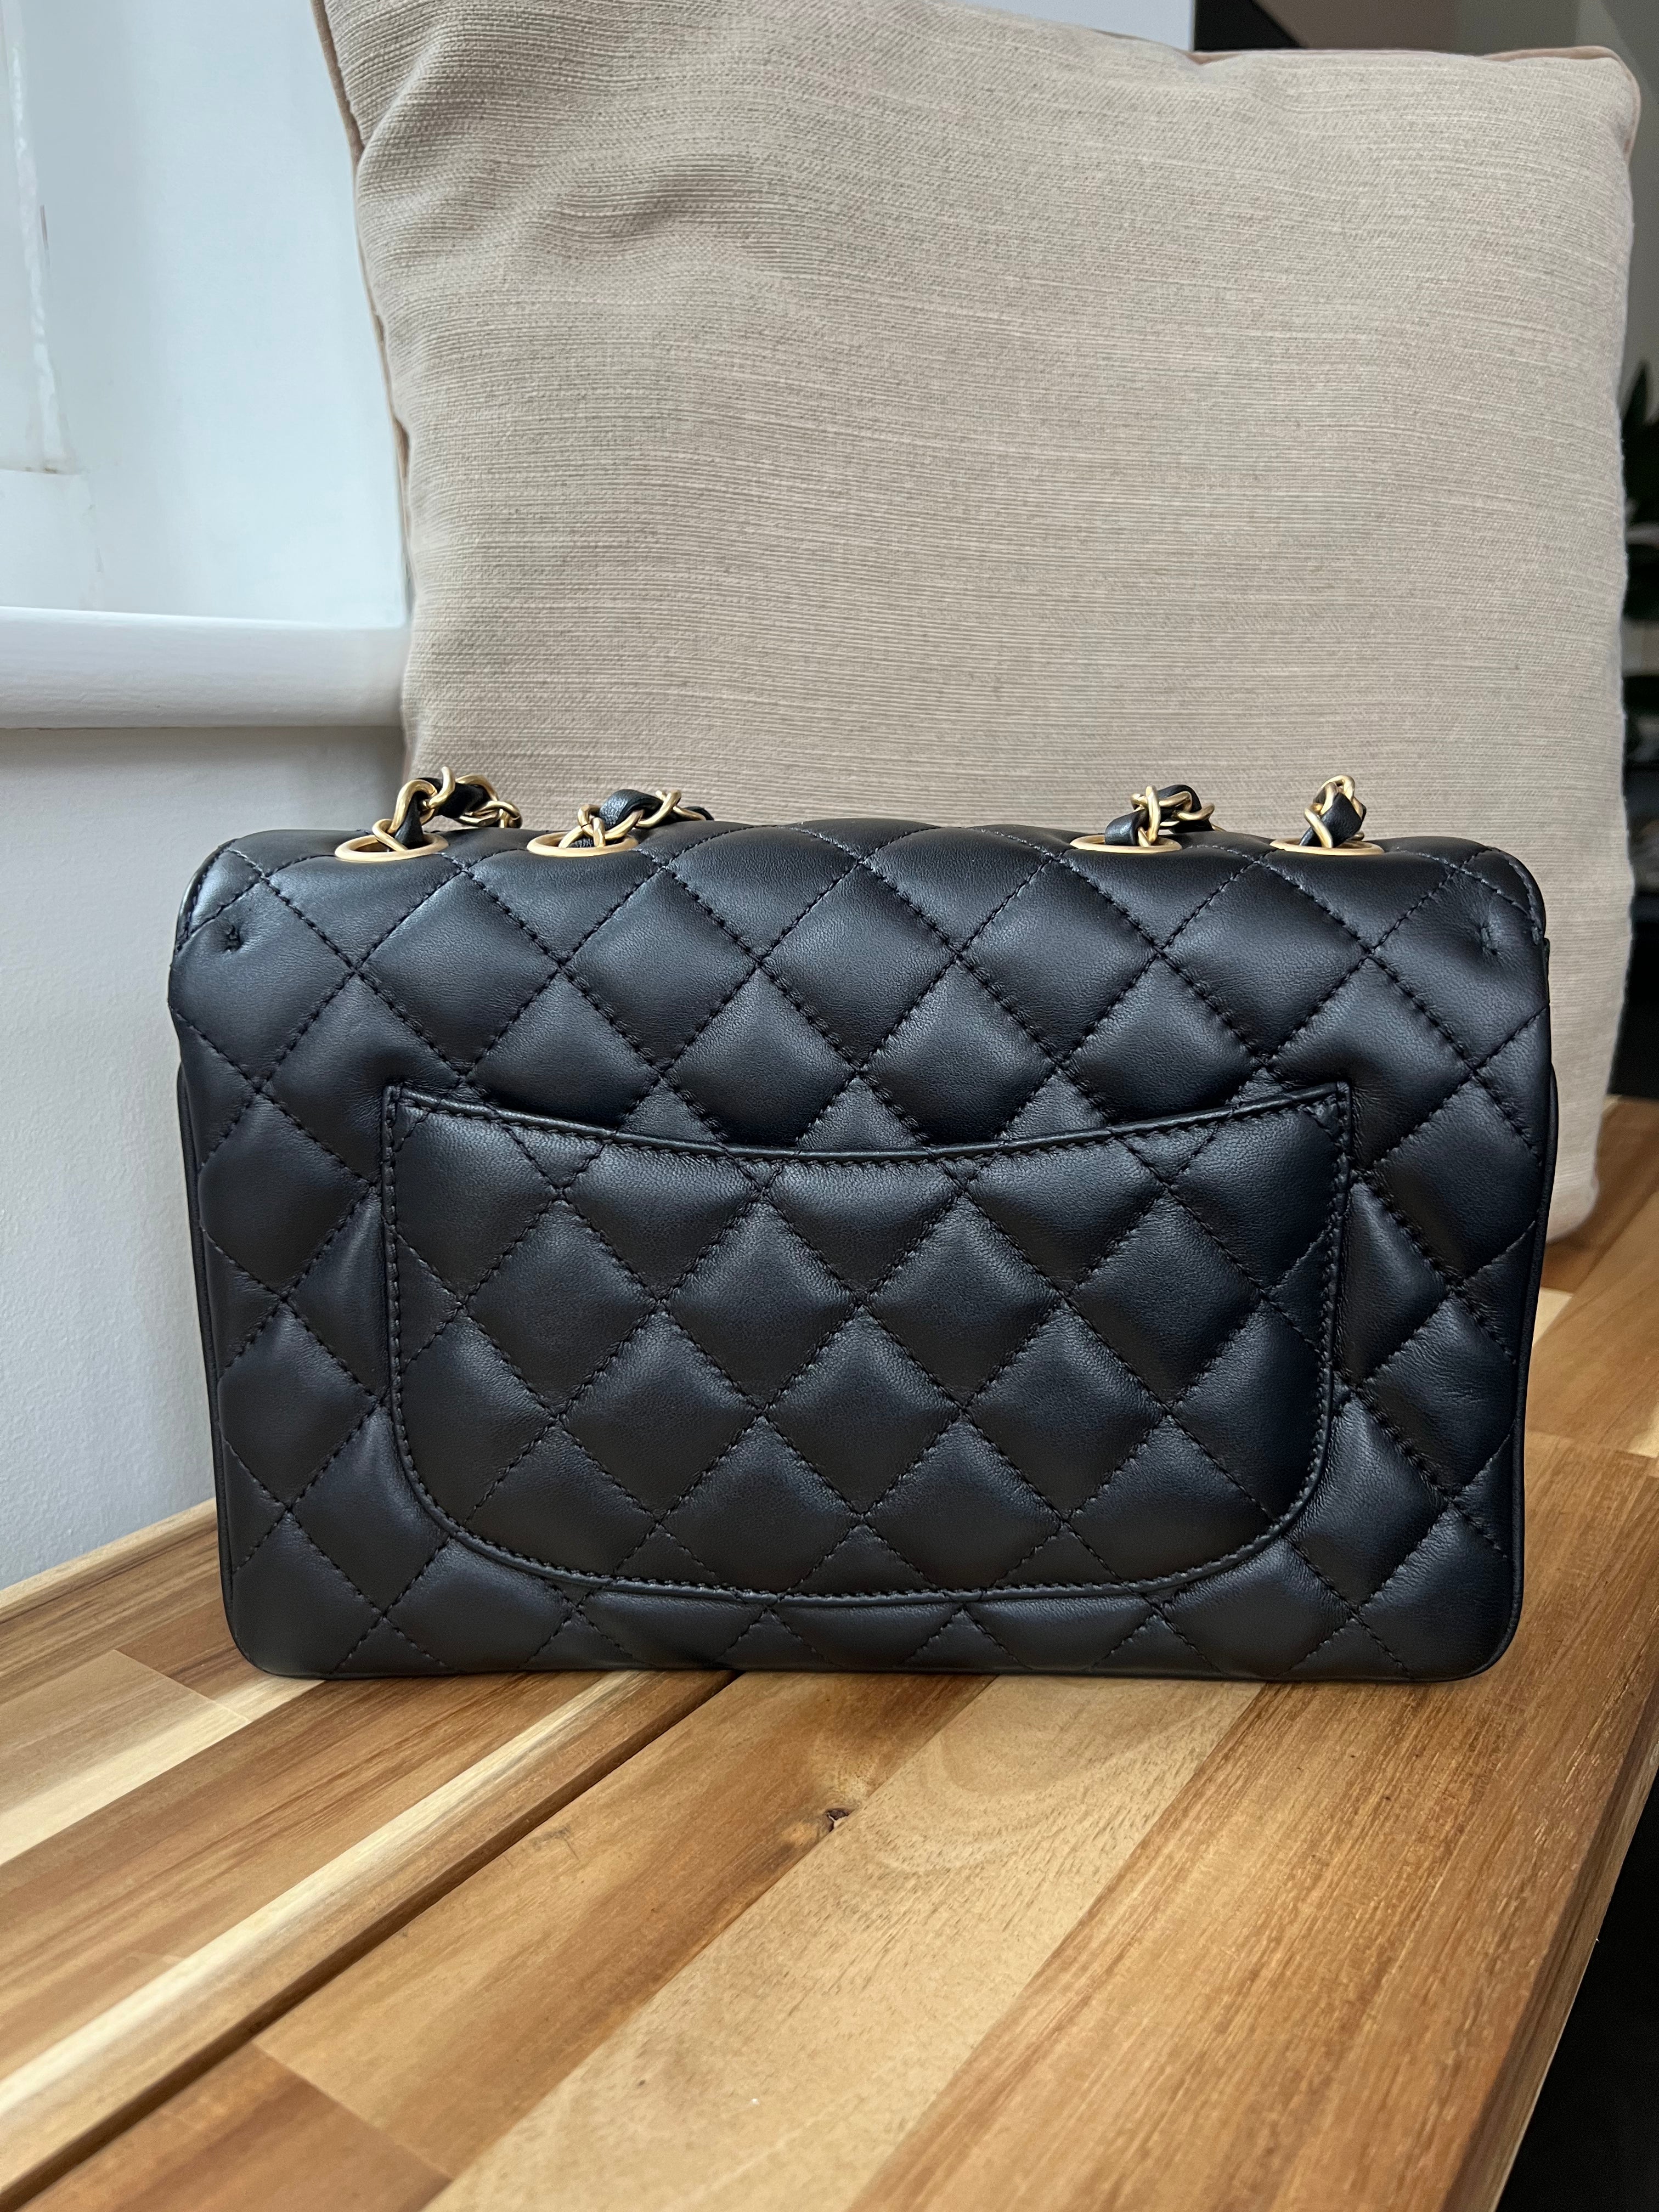 Chanel Classic Flap Bag Black Available in London 🇬🇧Pounds: £6,500 